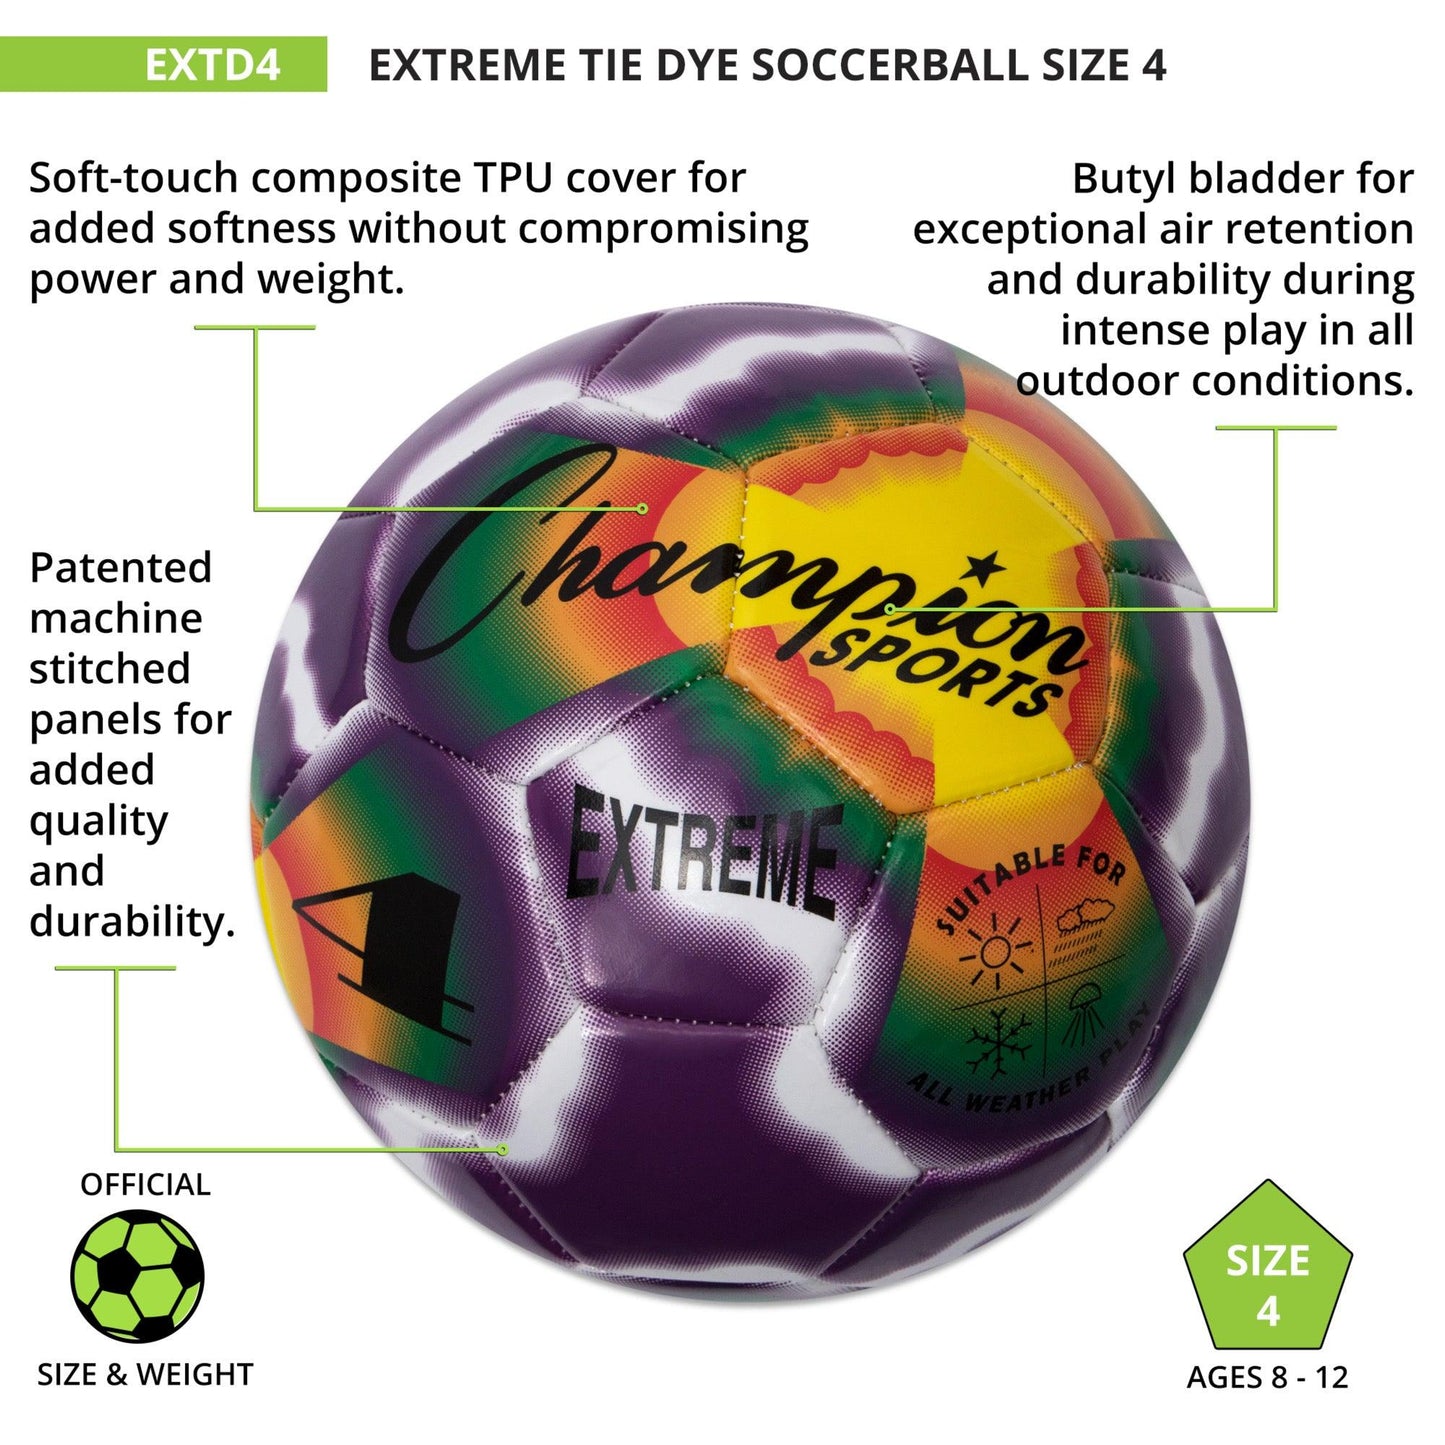 Extreme Tiedye Soccerball, Size 4